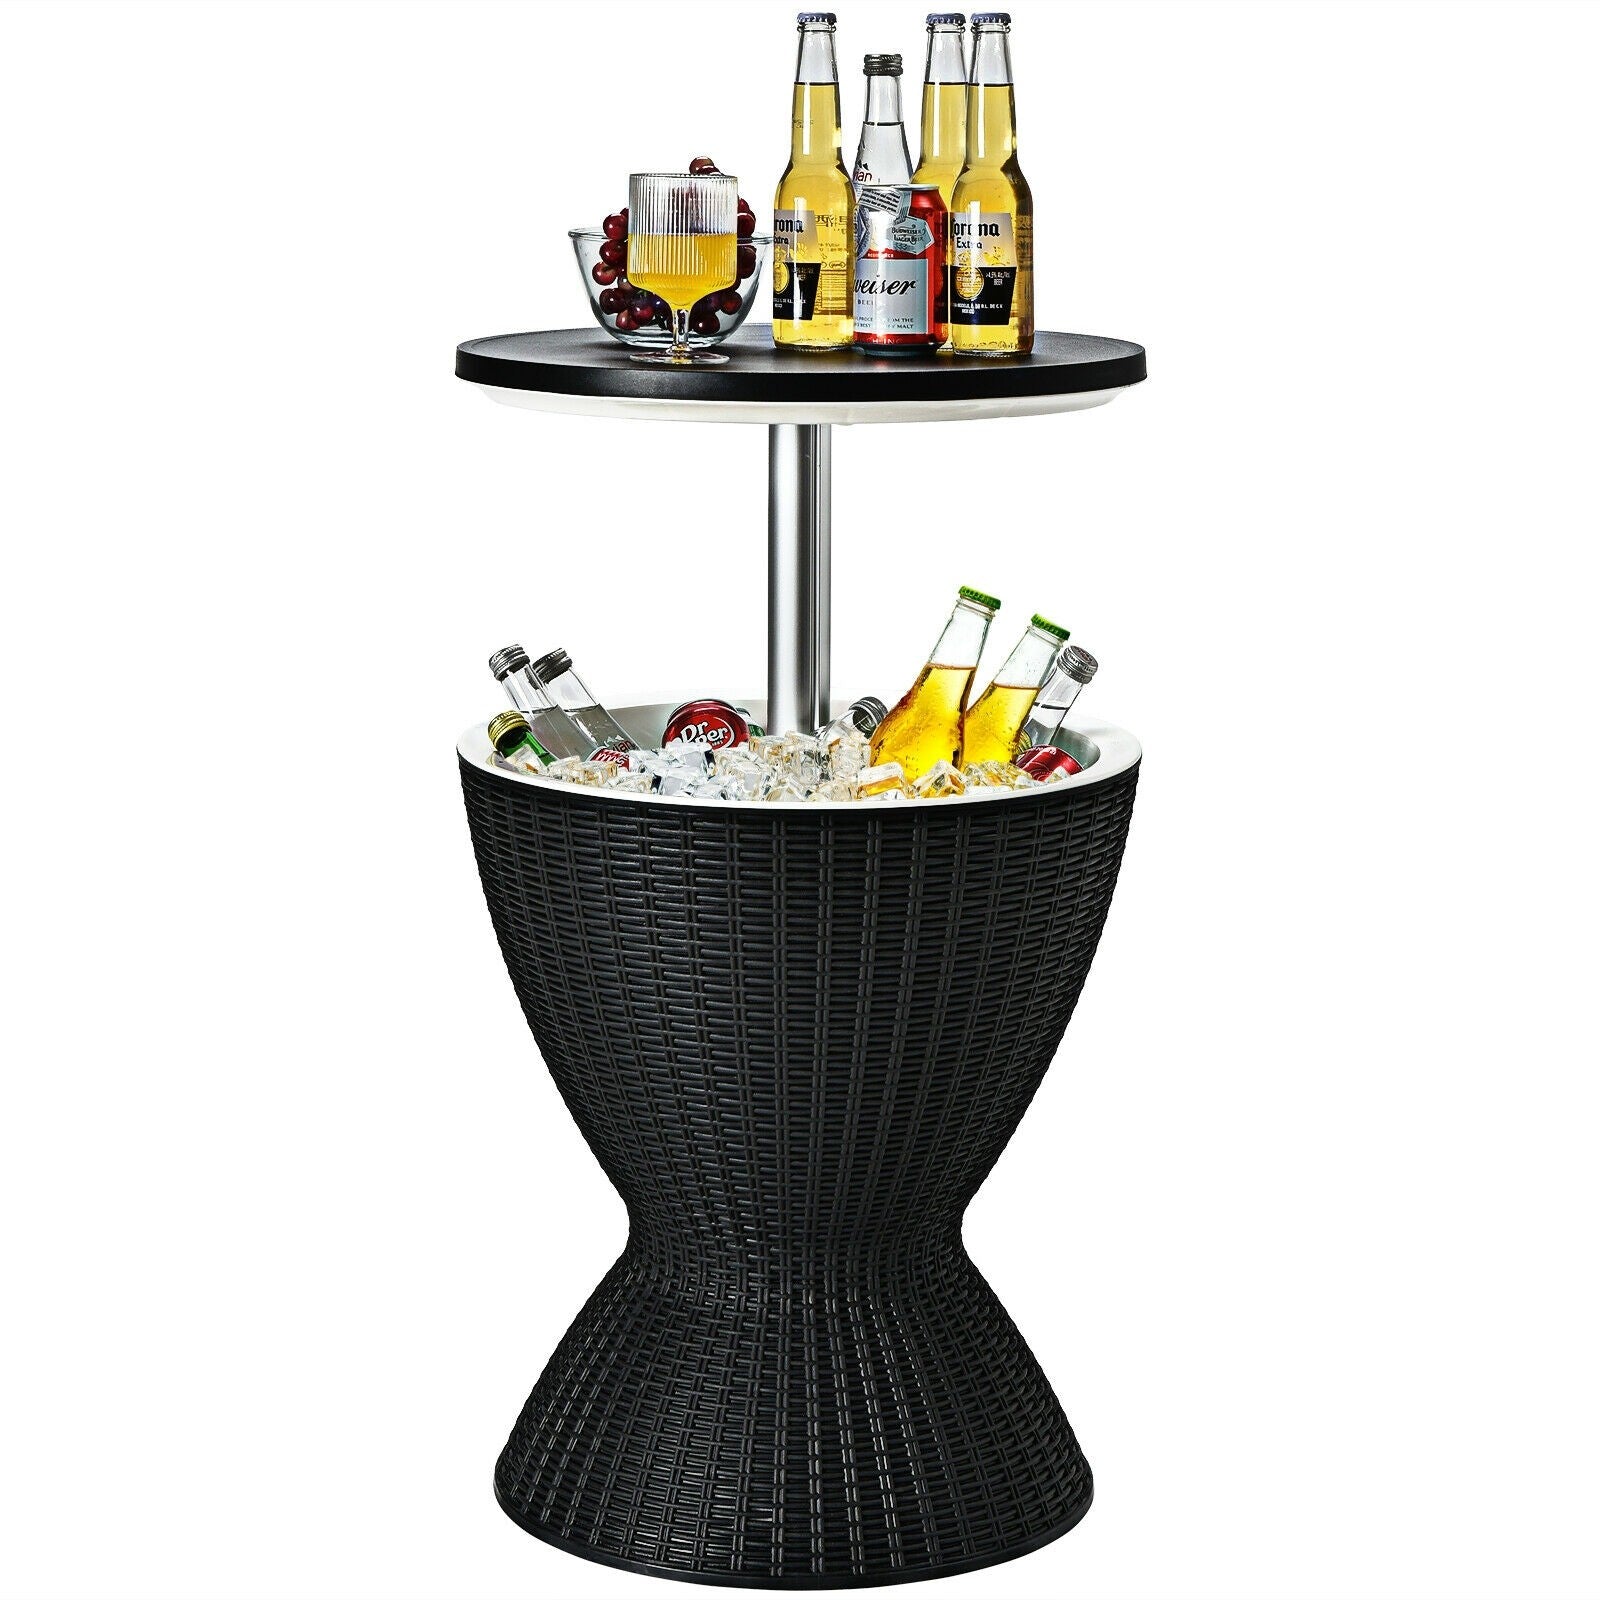 Giantex Cool Bar Table, 8 Gallon Beer and Wine Cooler (Black)